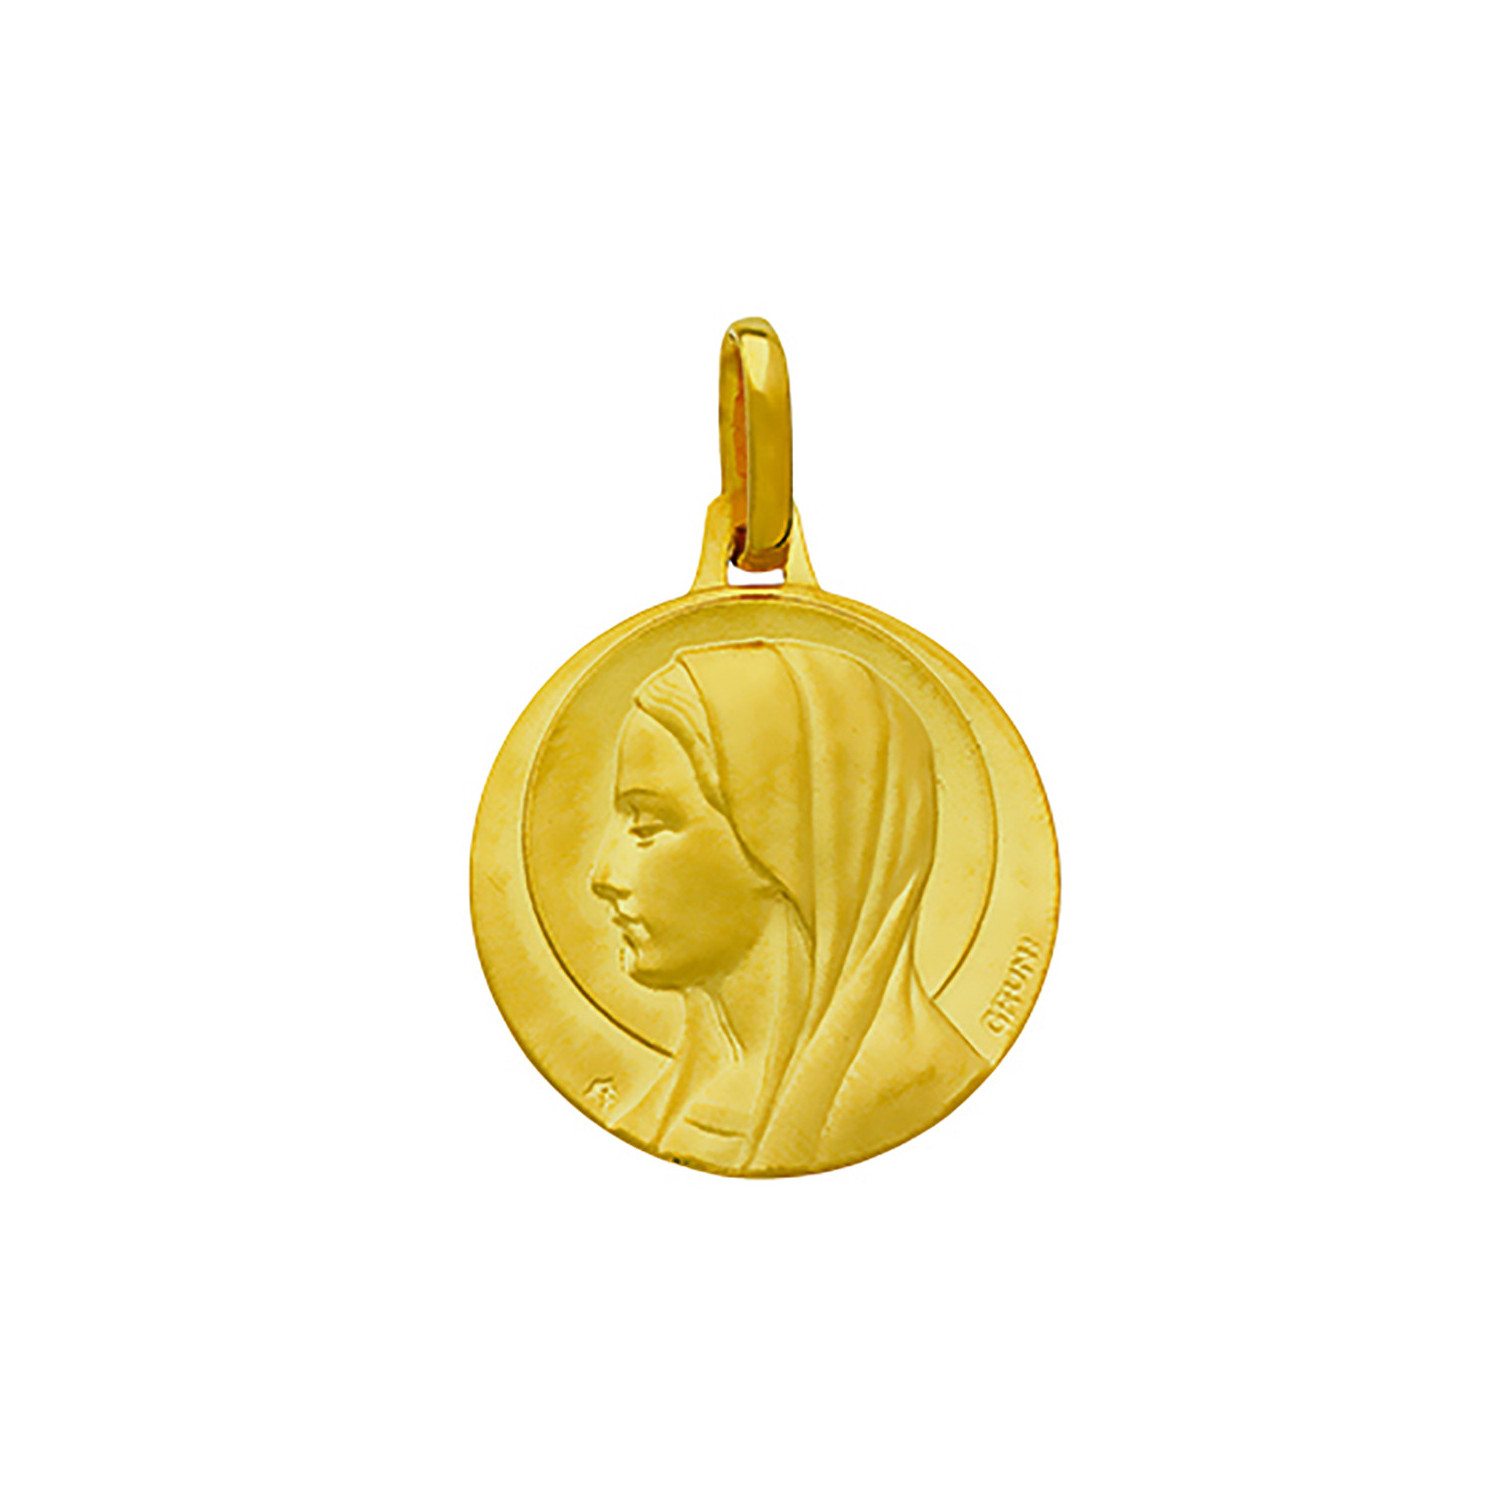 Médaille ronde Vierge or jaune 18 carats